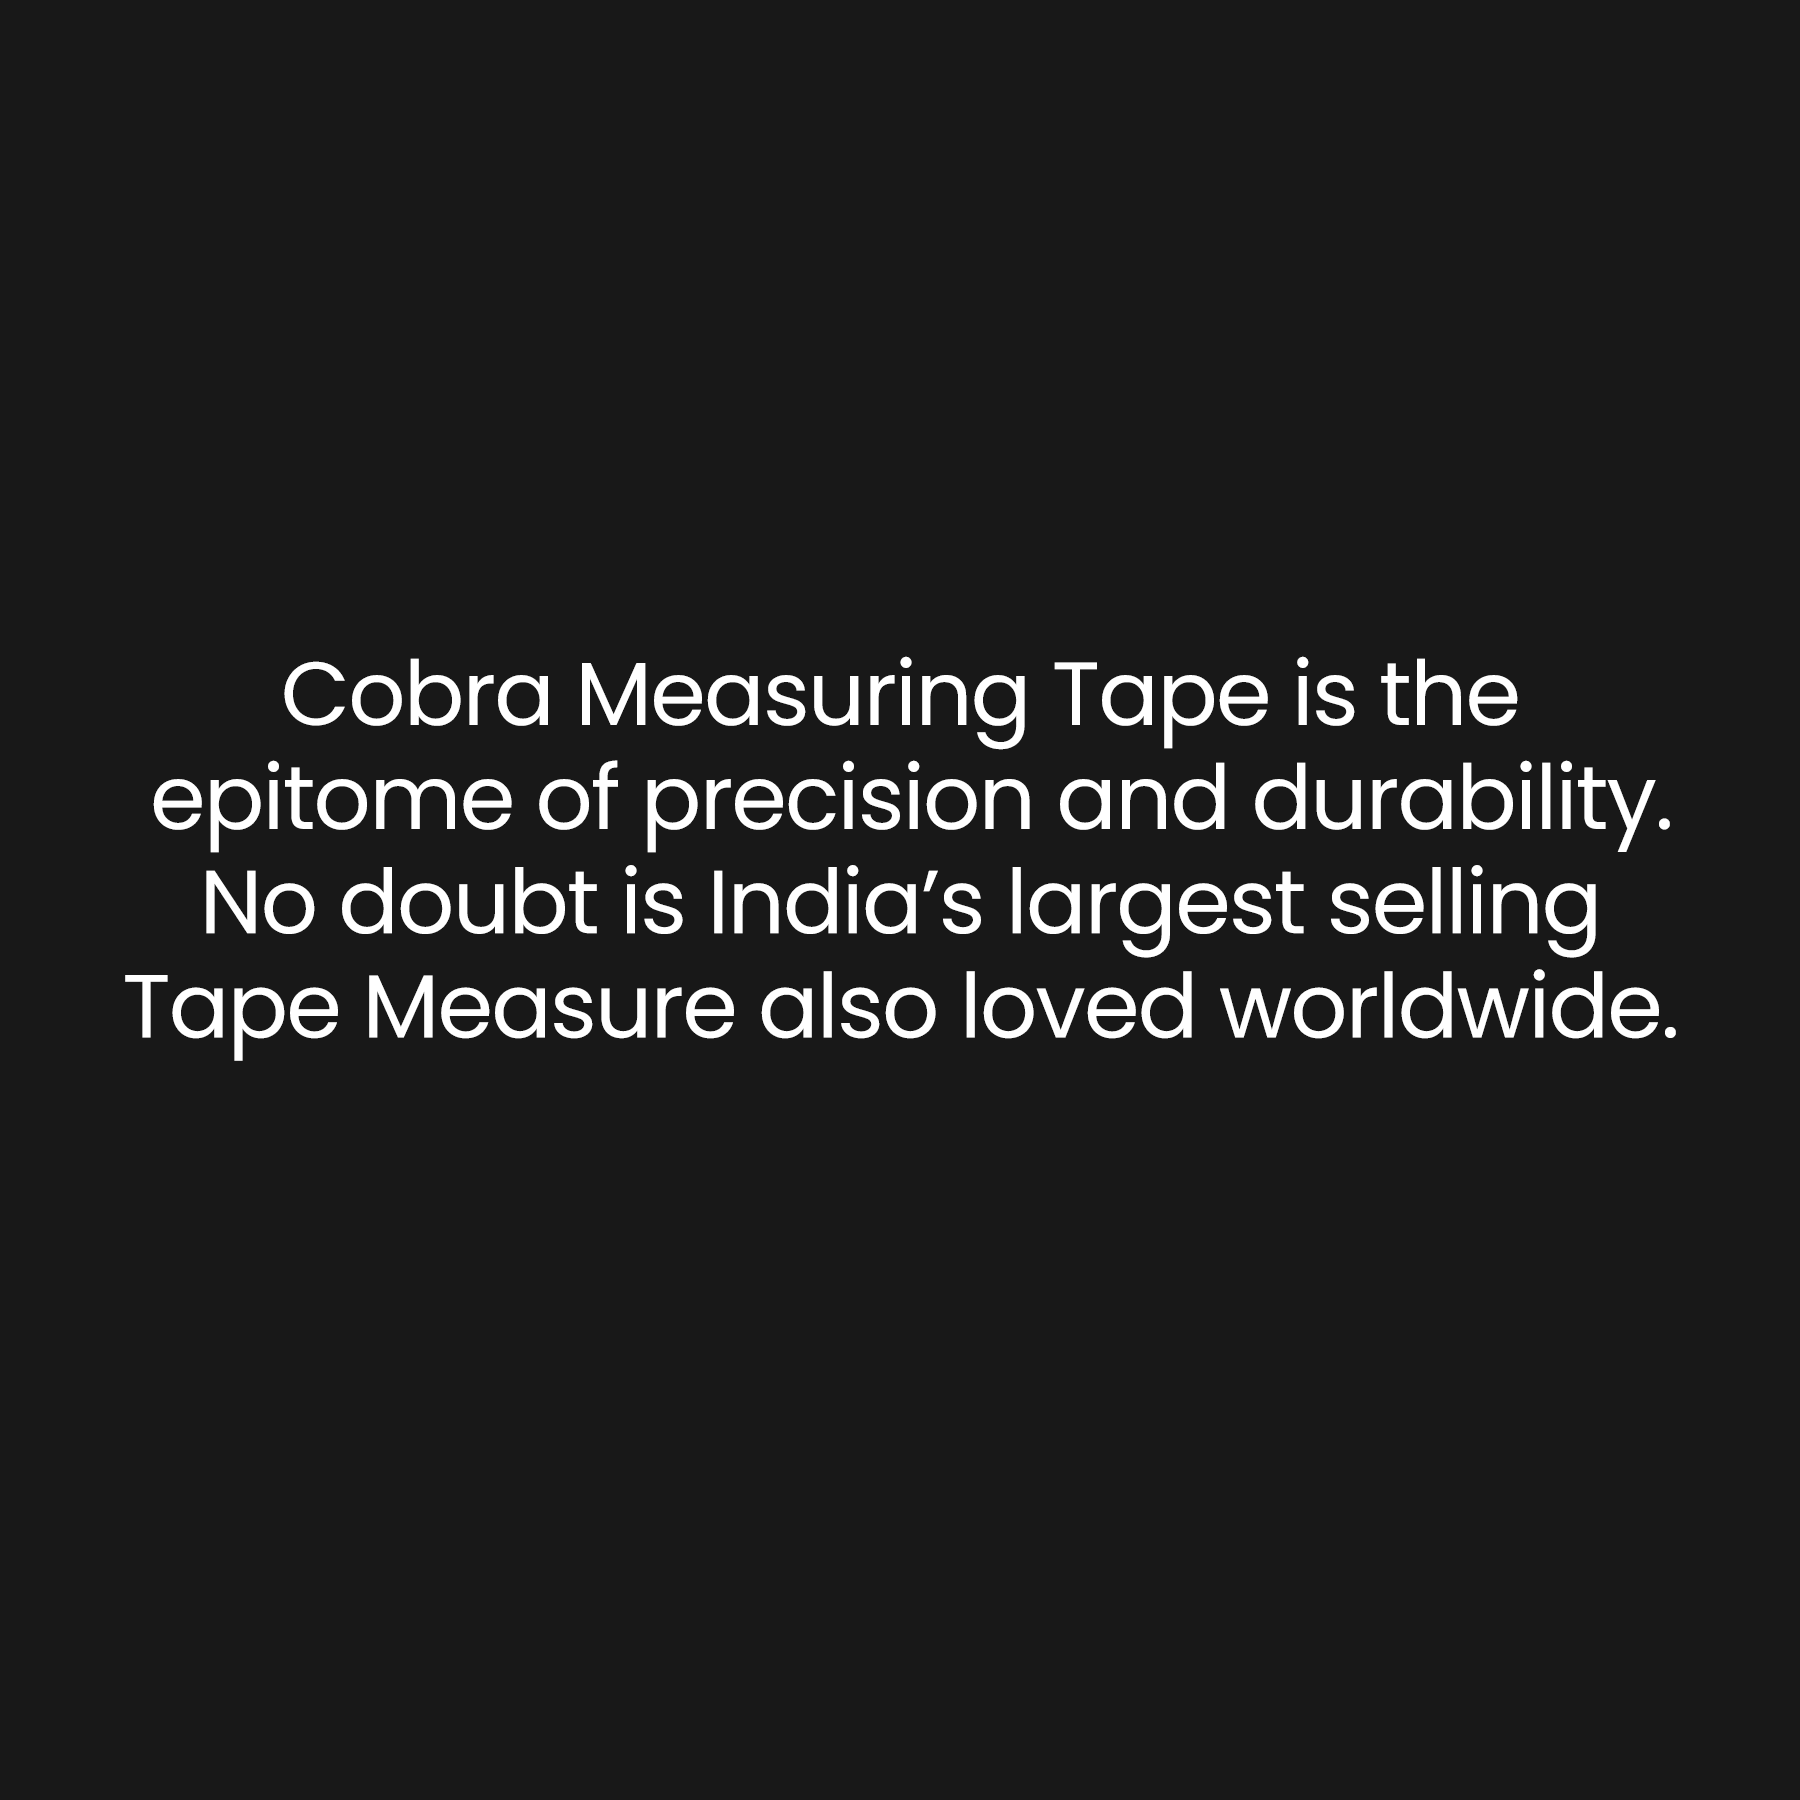 Cobra Measuring tape is epitome of precision and durability. No doubt is India's Largest selling Tape Measure also loved worldwide